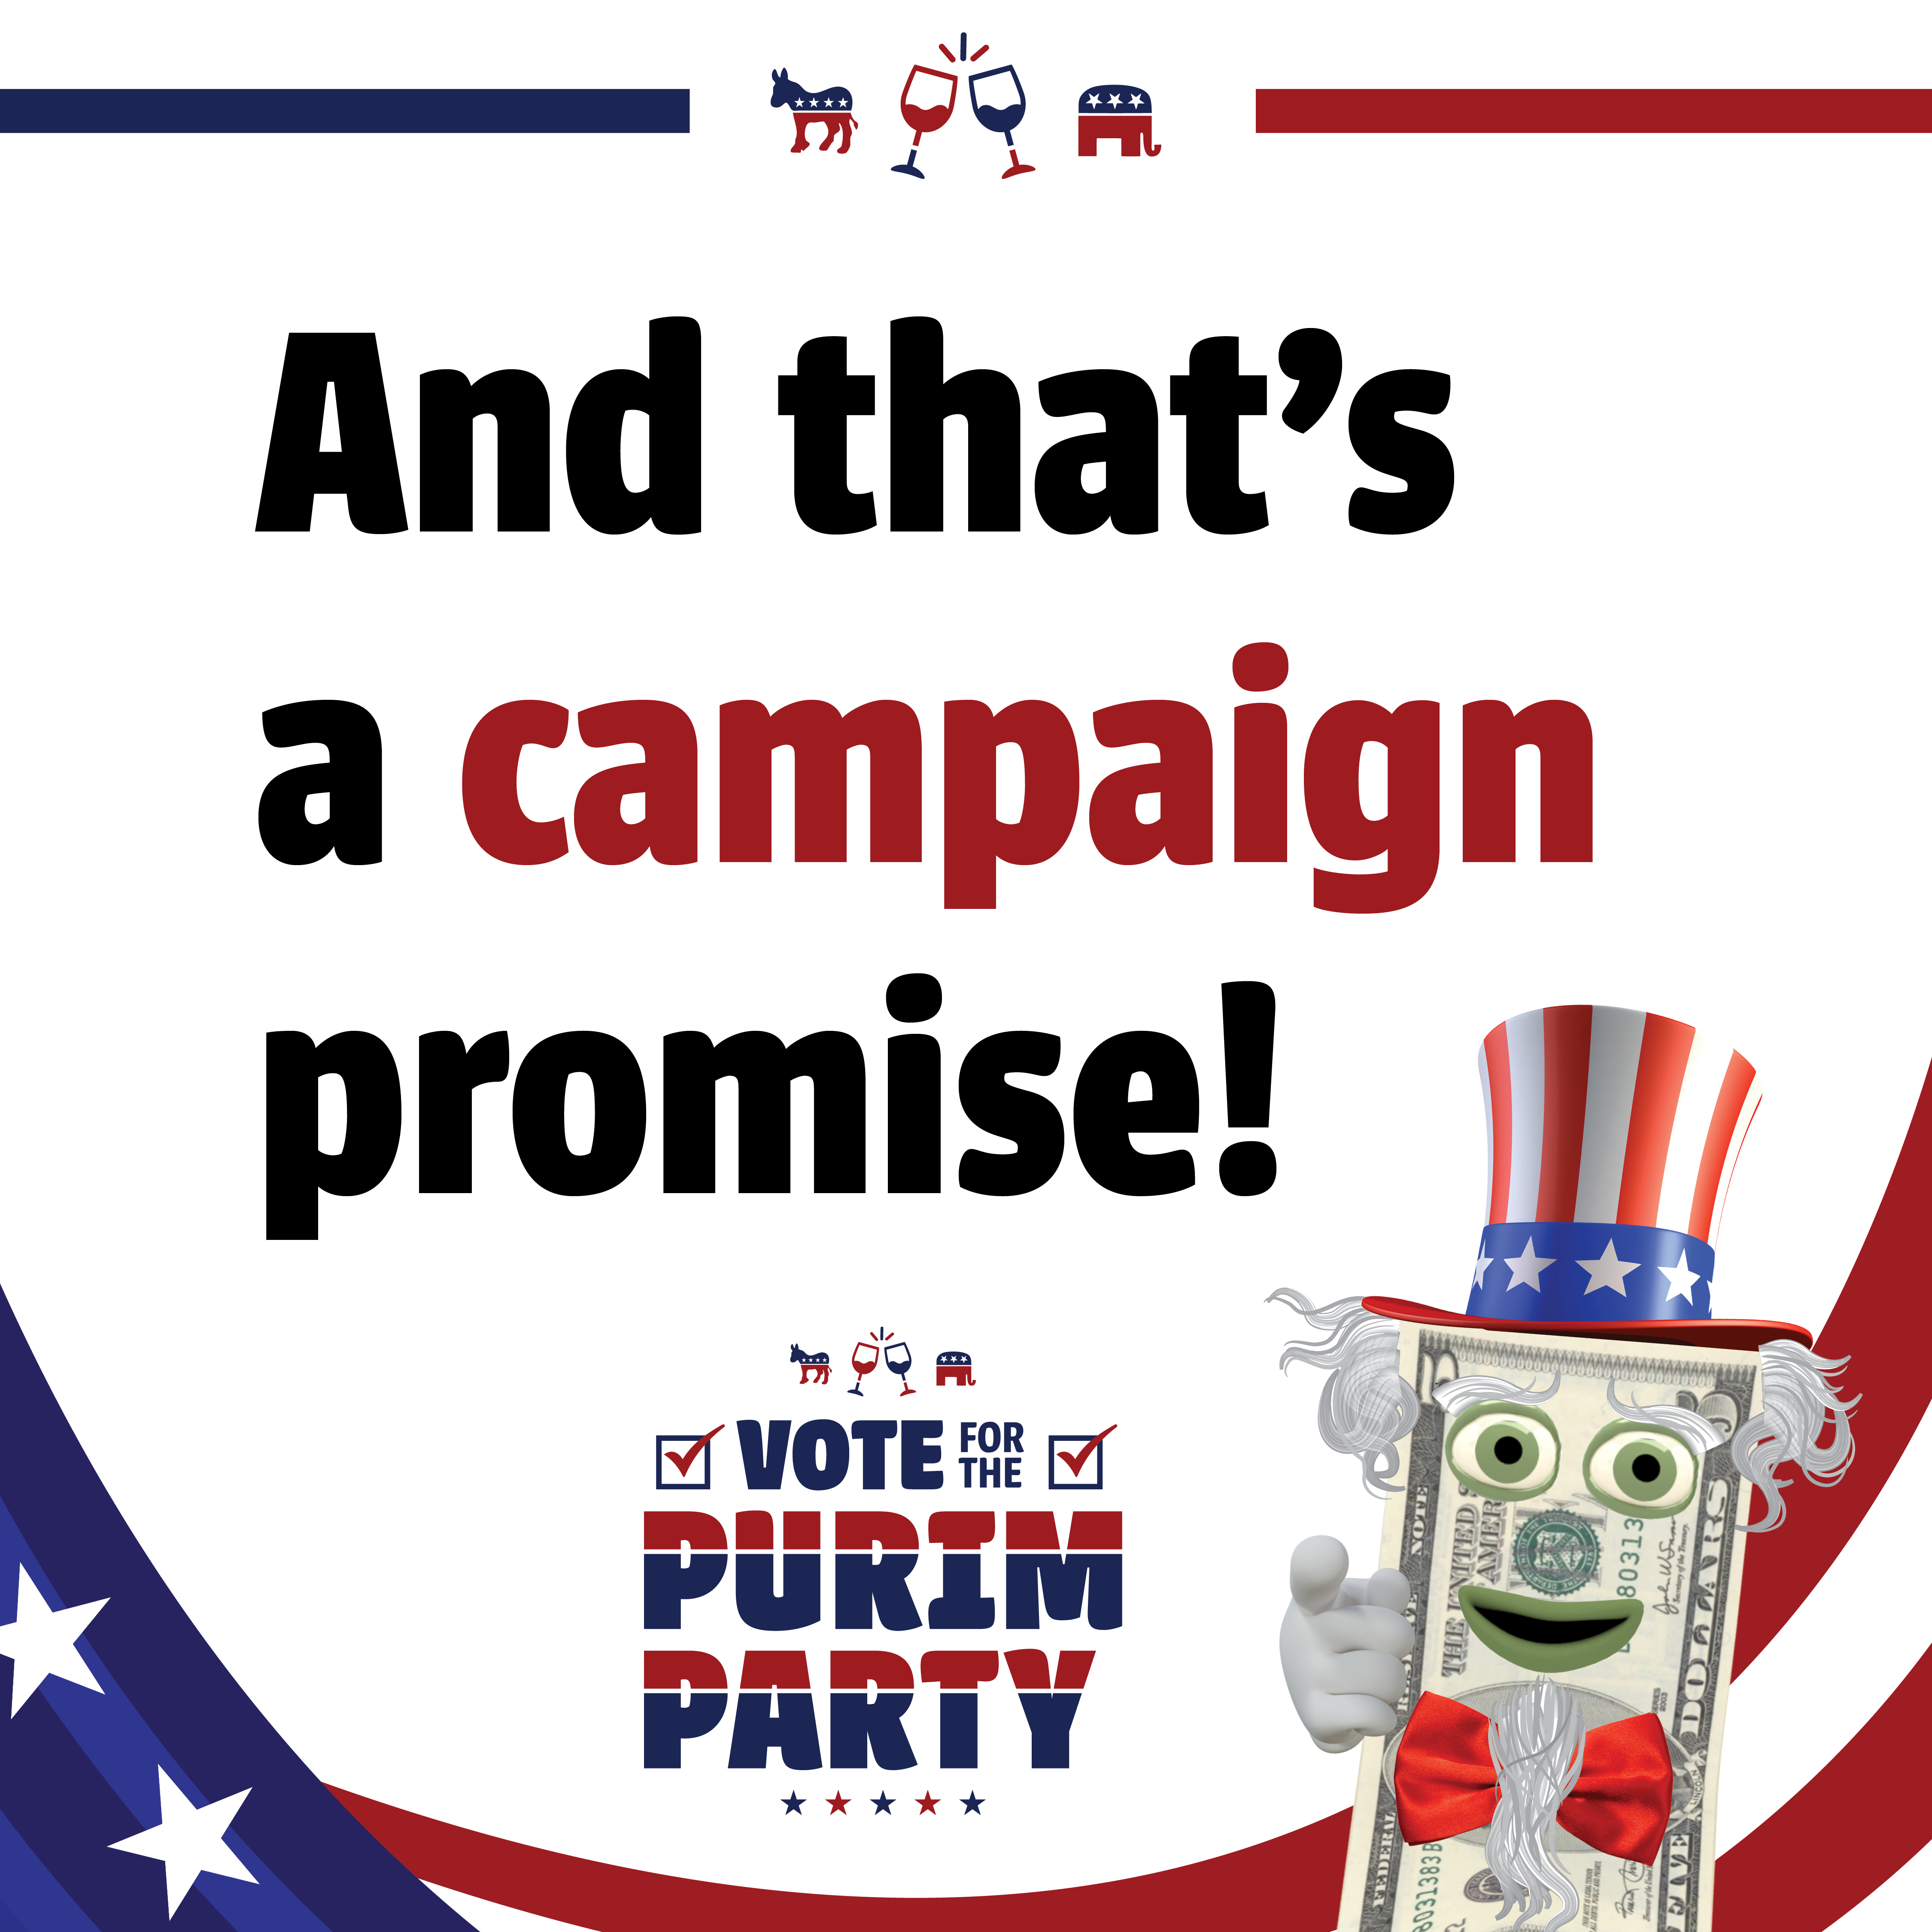 And that's a campaign promise!